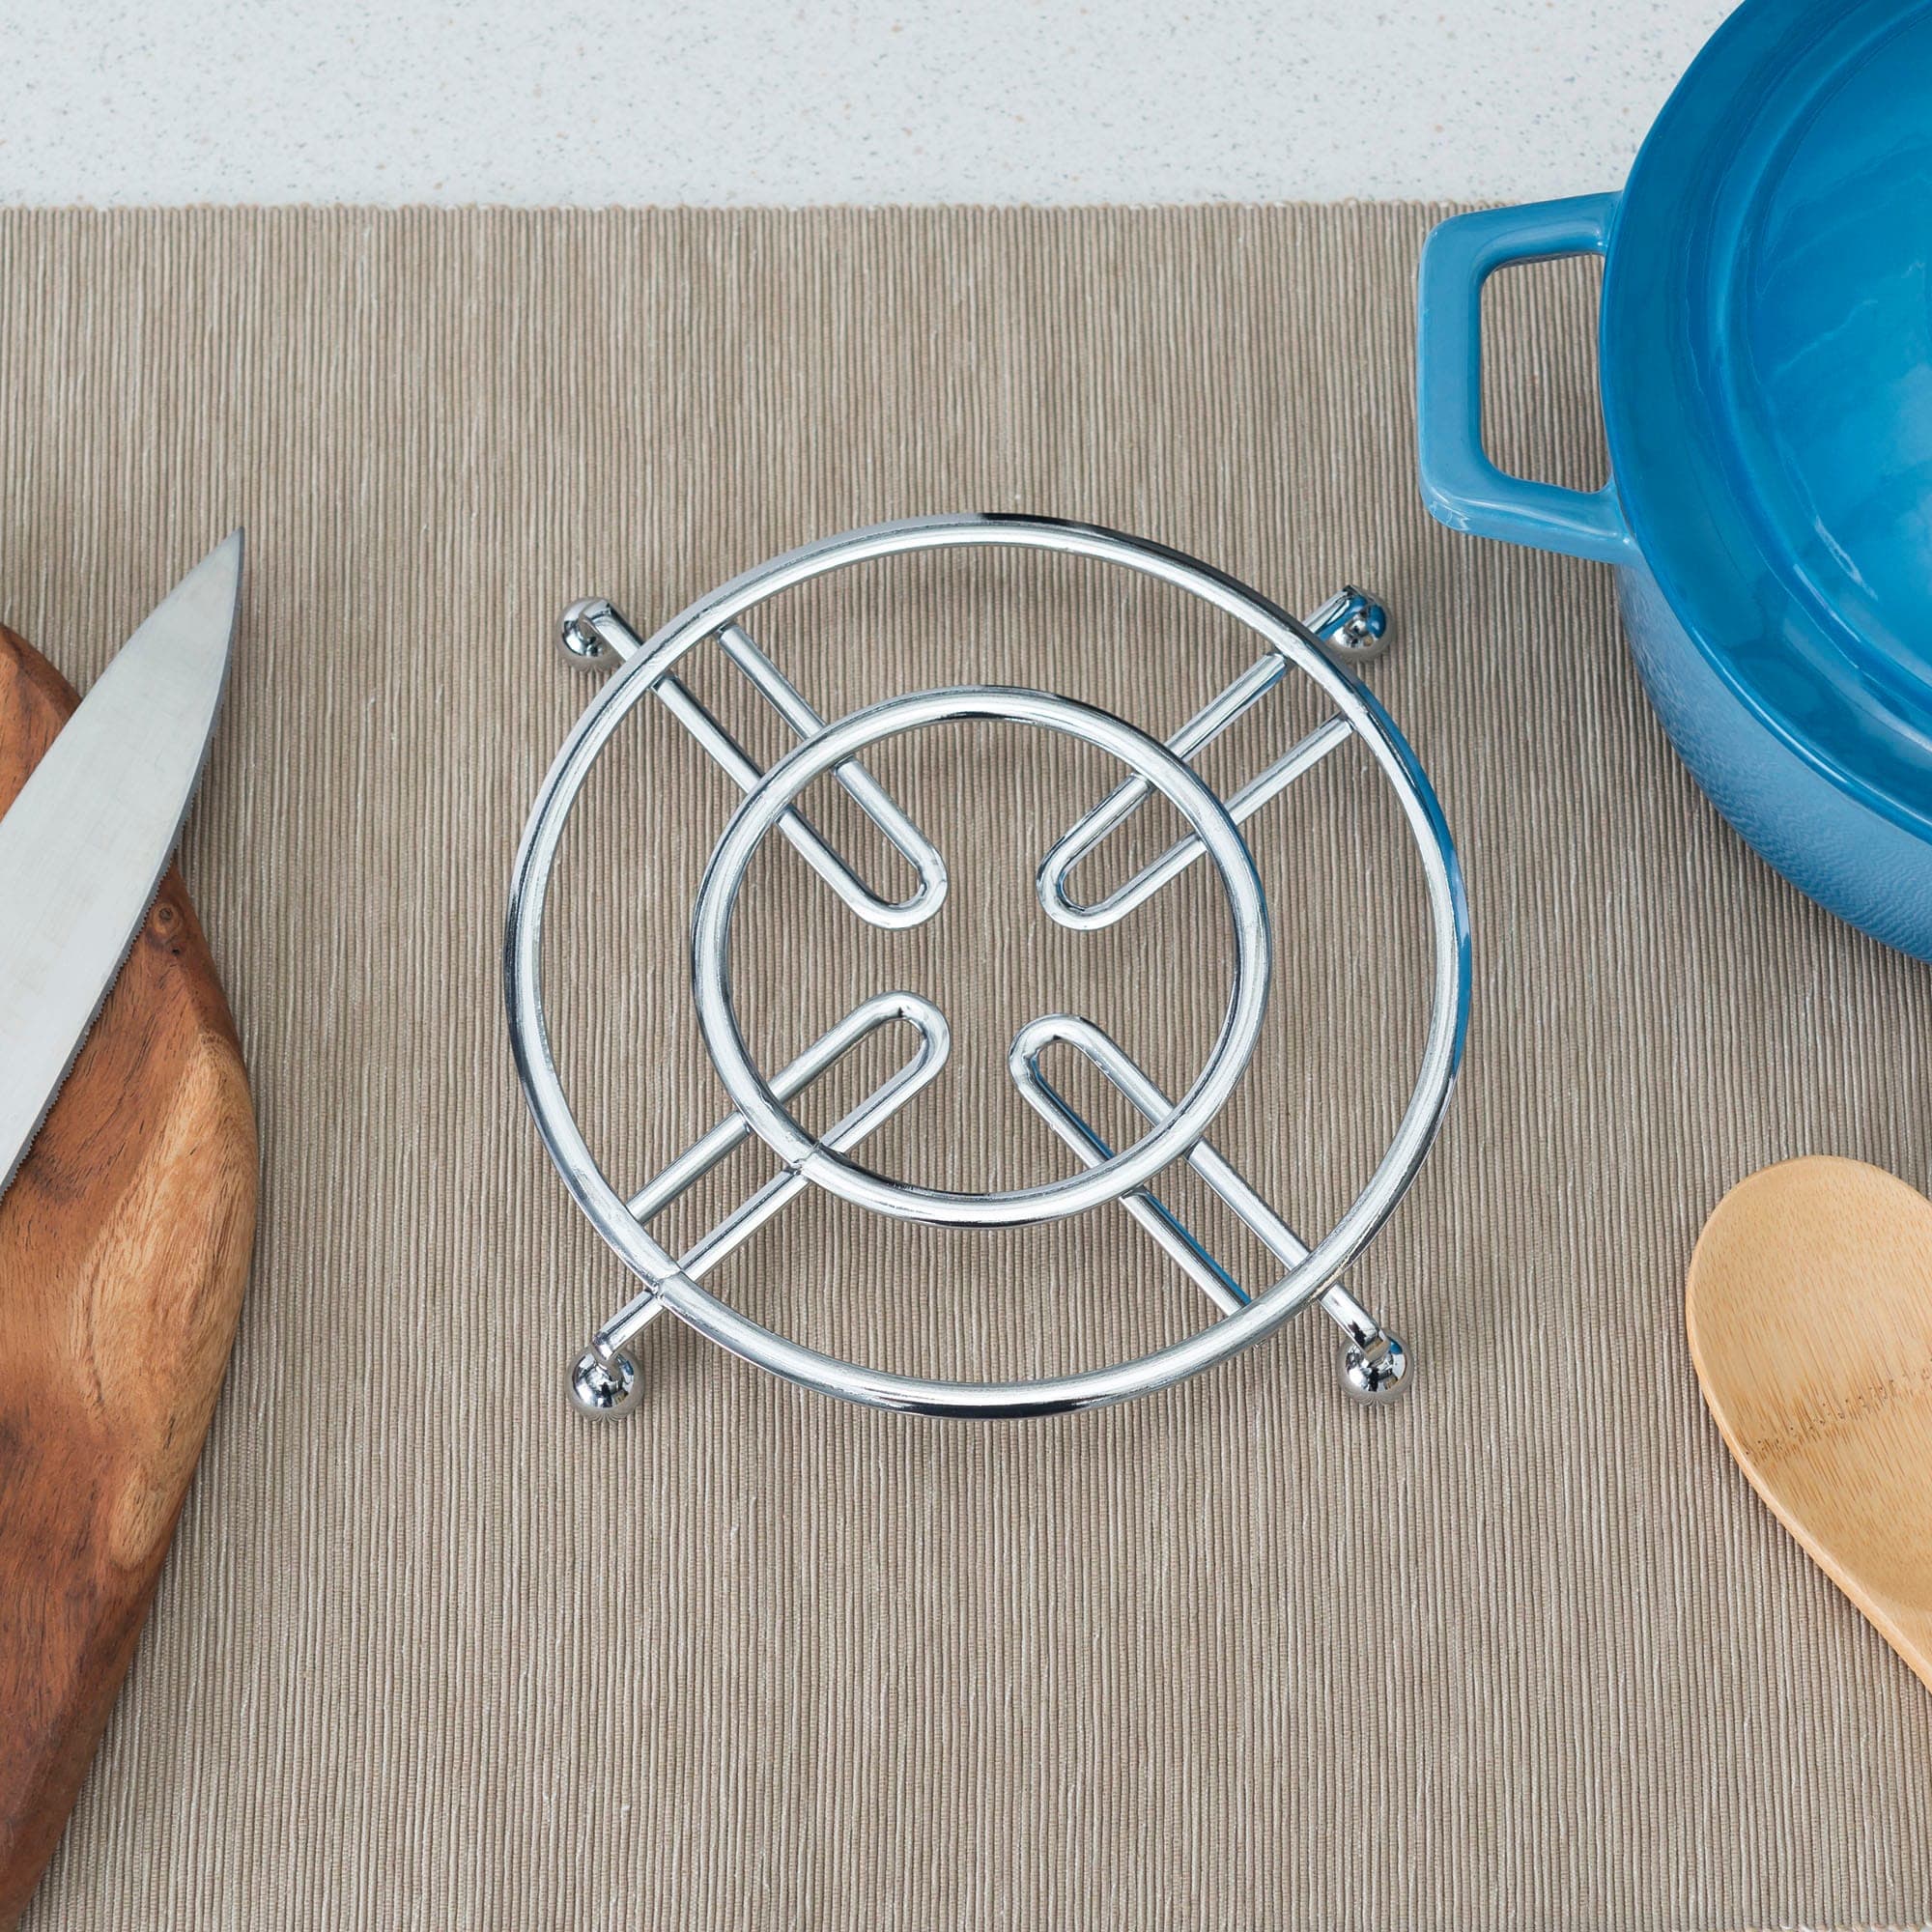 Home Basics Flat Wire Collection Trivet $3.00 EACH, CASE PACK OF 12